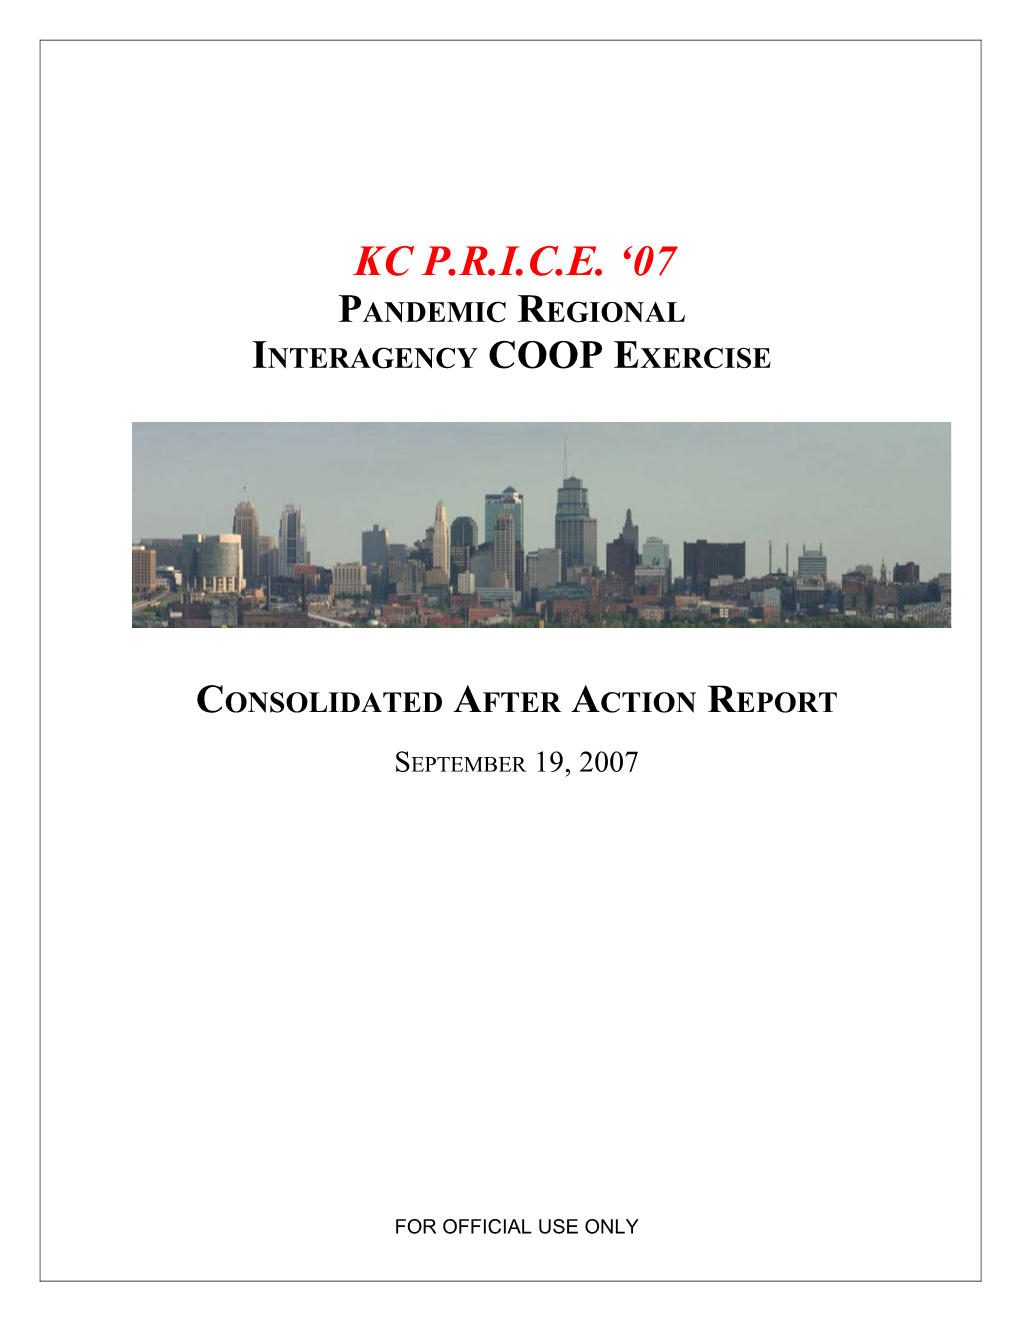 Consolidated After Action Report